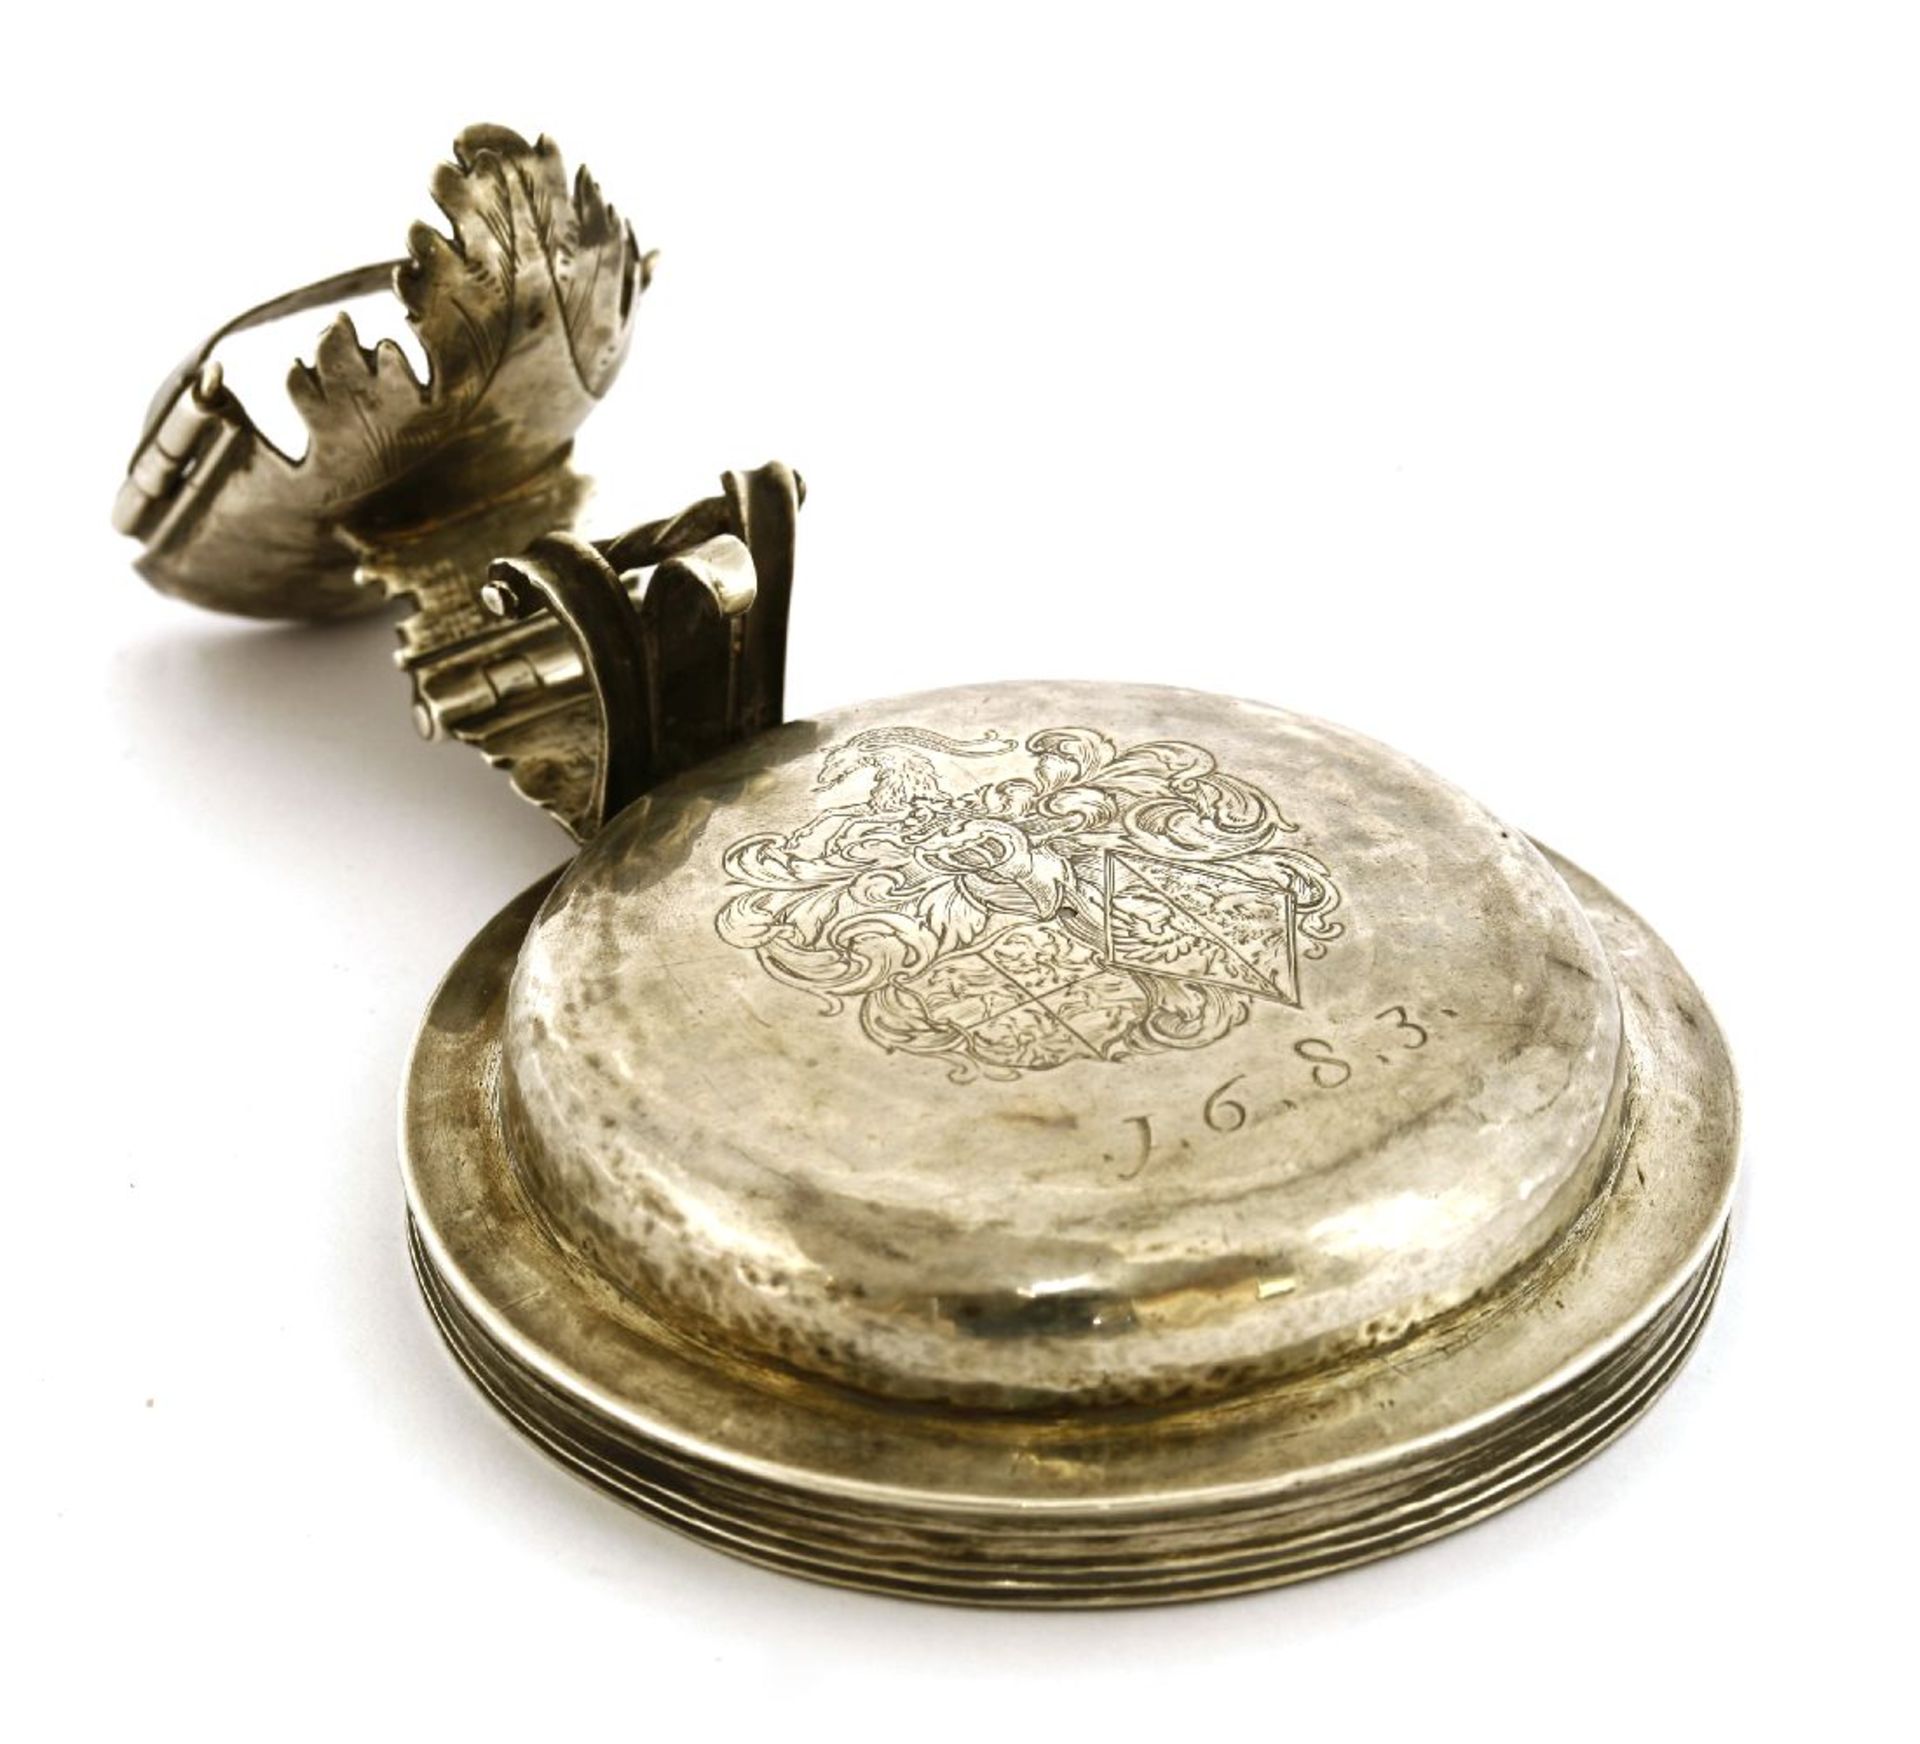 A Dutch silver tankard mount,engraved with an armorial and dated '1683', initialled M E F below